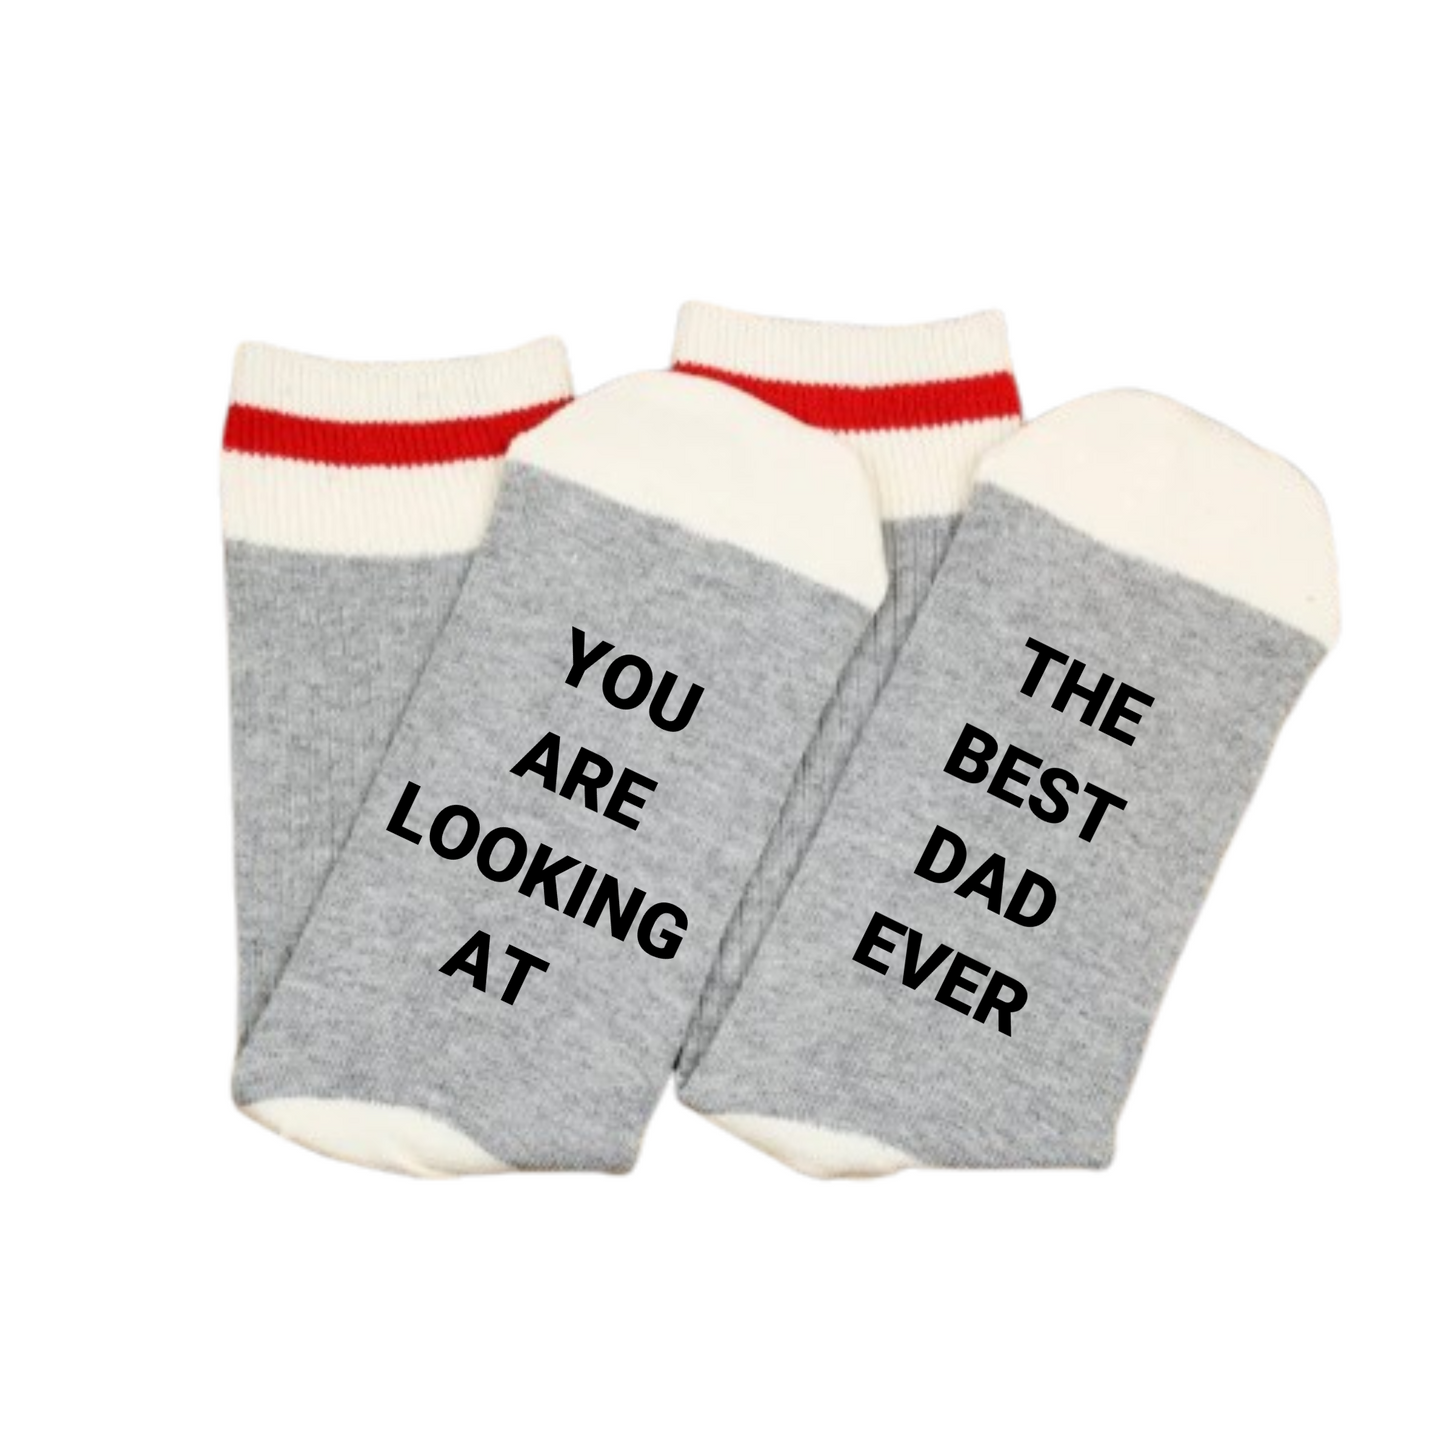 Cabin Socks- You are looking at the best dad ever